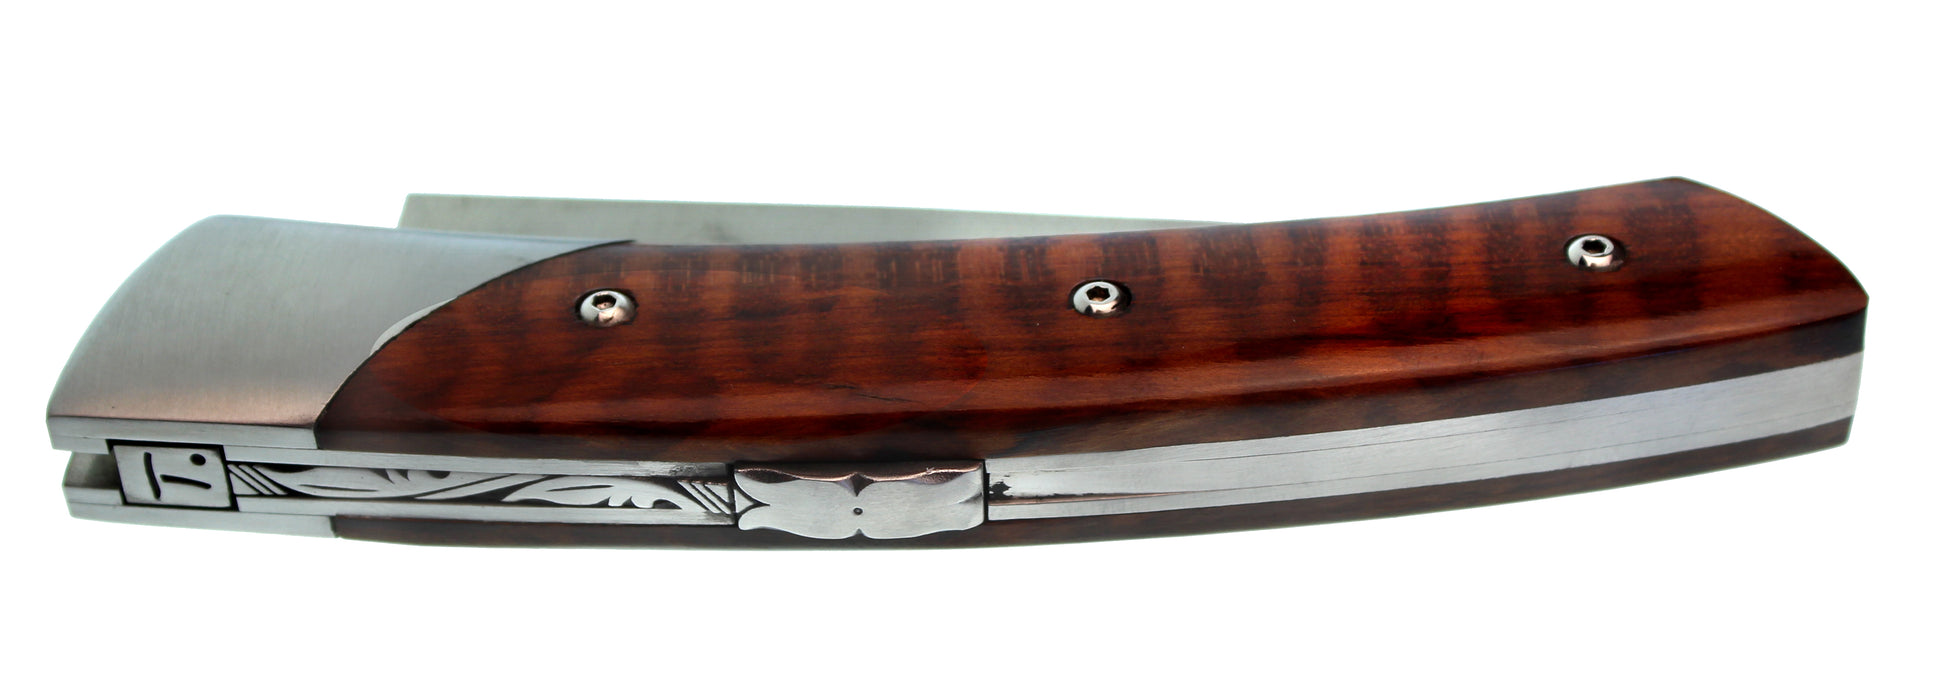 CHAMBRIARD SNAKEWOOD HANDLE TRAPPER LOCK BLADE FOLDING KNIFE